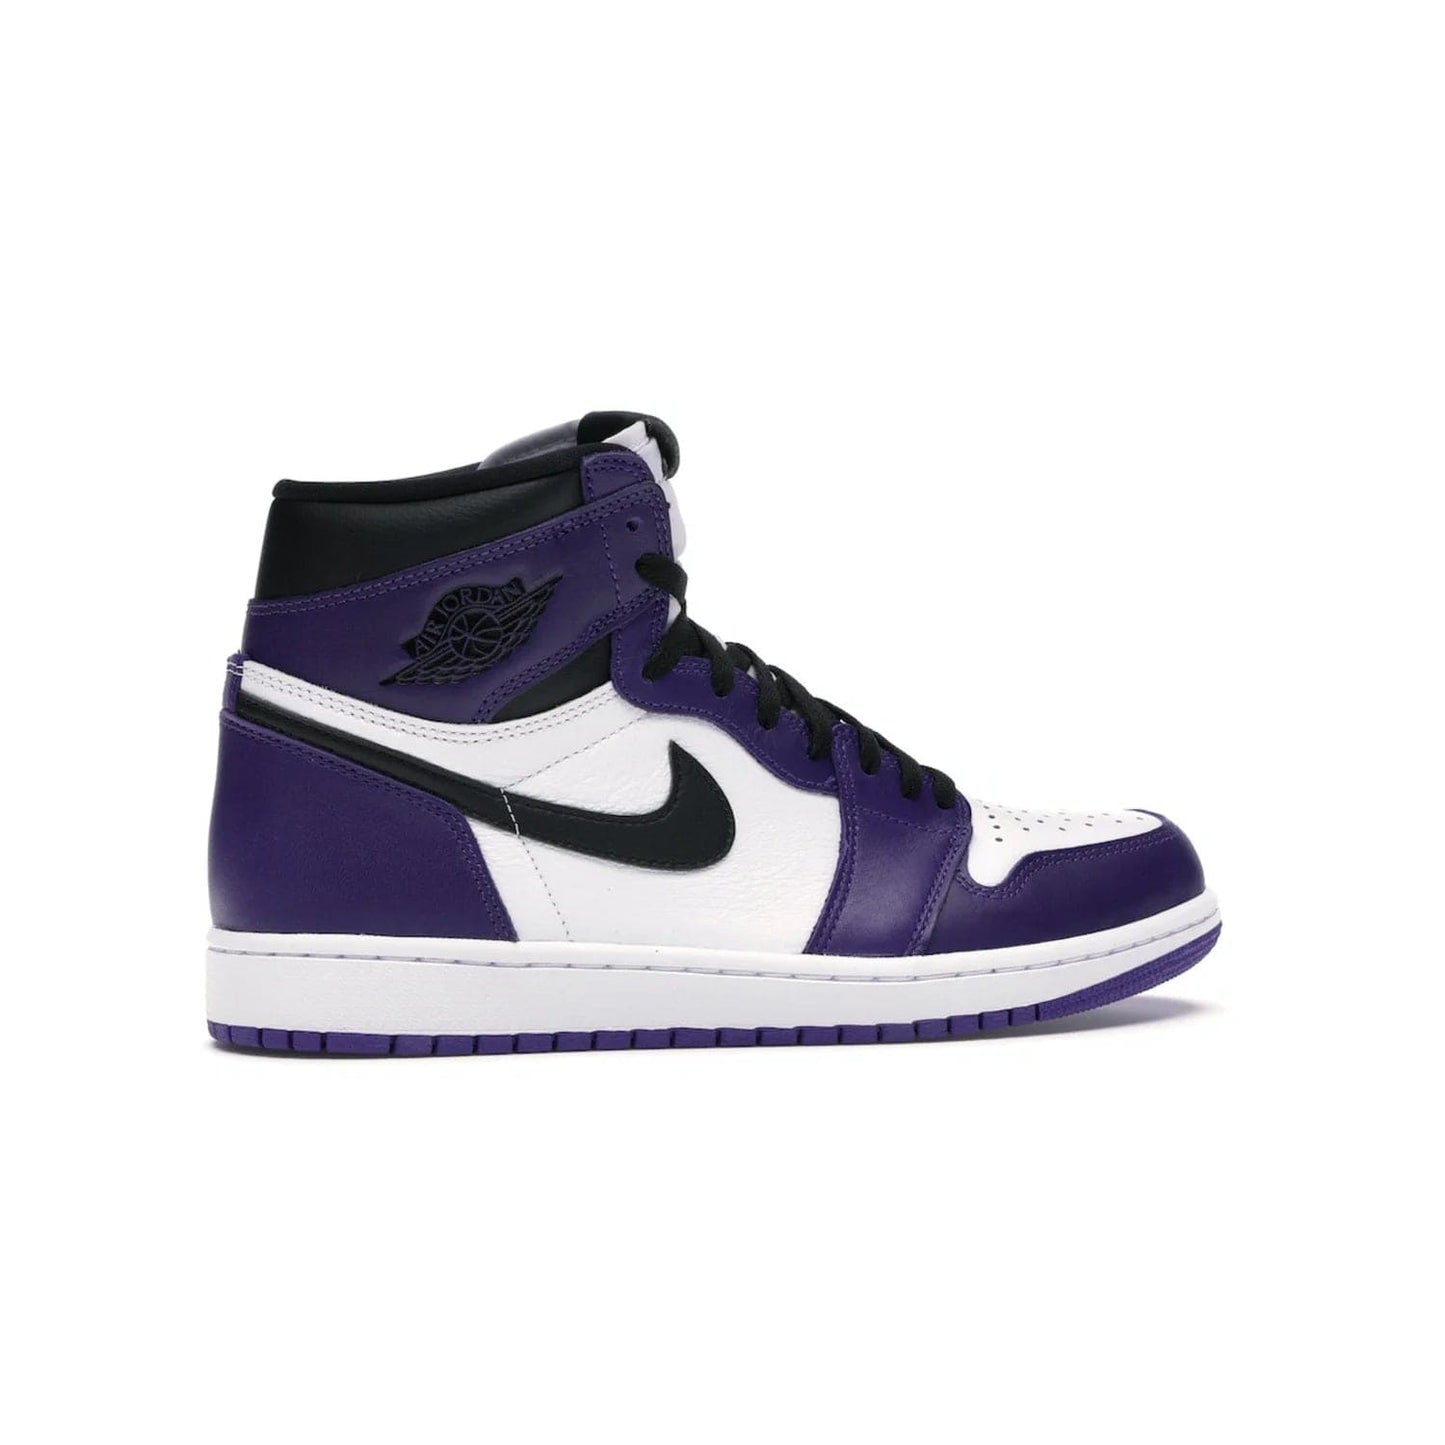 Jordan 1 Retro High Court Purple White - Image 35 - Only at www.BallersClubKickz.com - Grab the classic Jordan 1 Retro High Court Purple White and add major flavor to your collection. White leather upper with Court Purple overlays and Swoosh logo. White midsole and purple outsole. Get yours and rep your Jordan Brand.